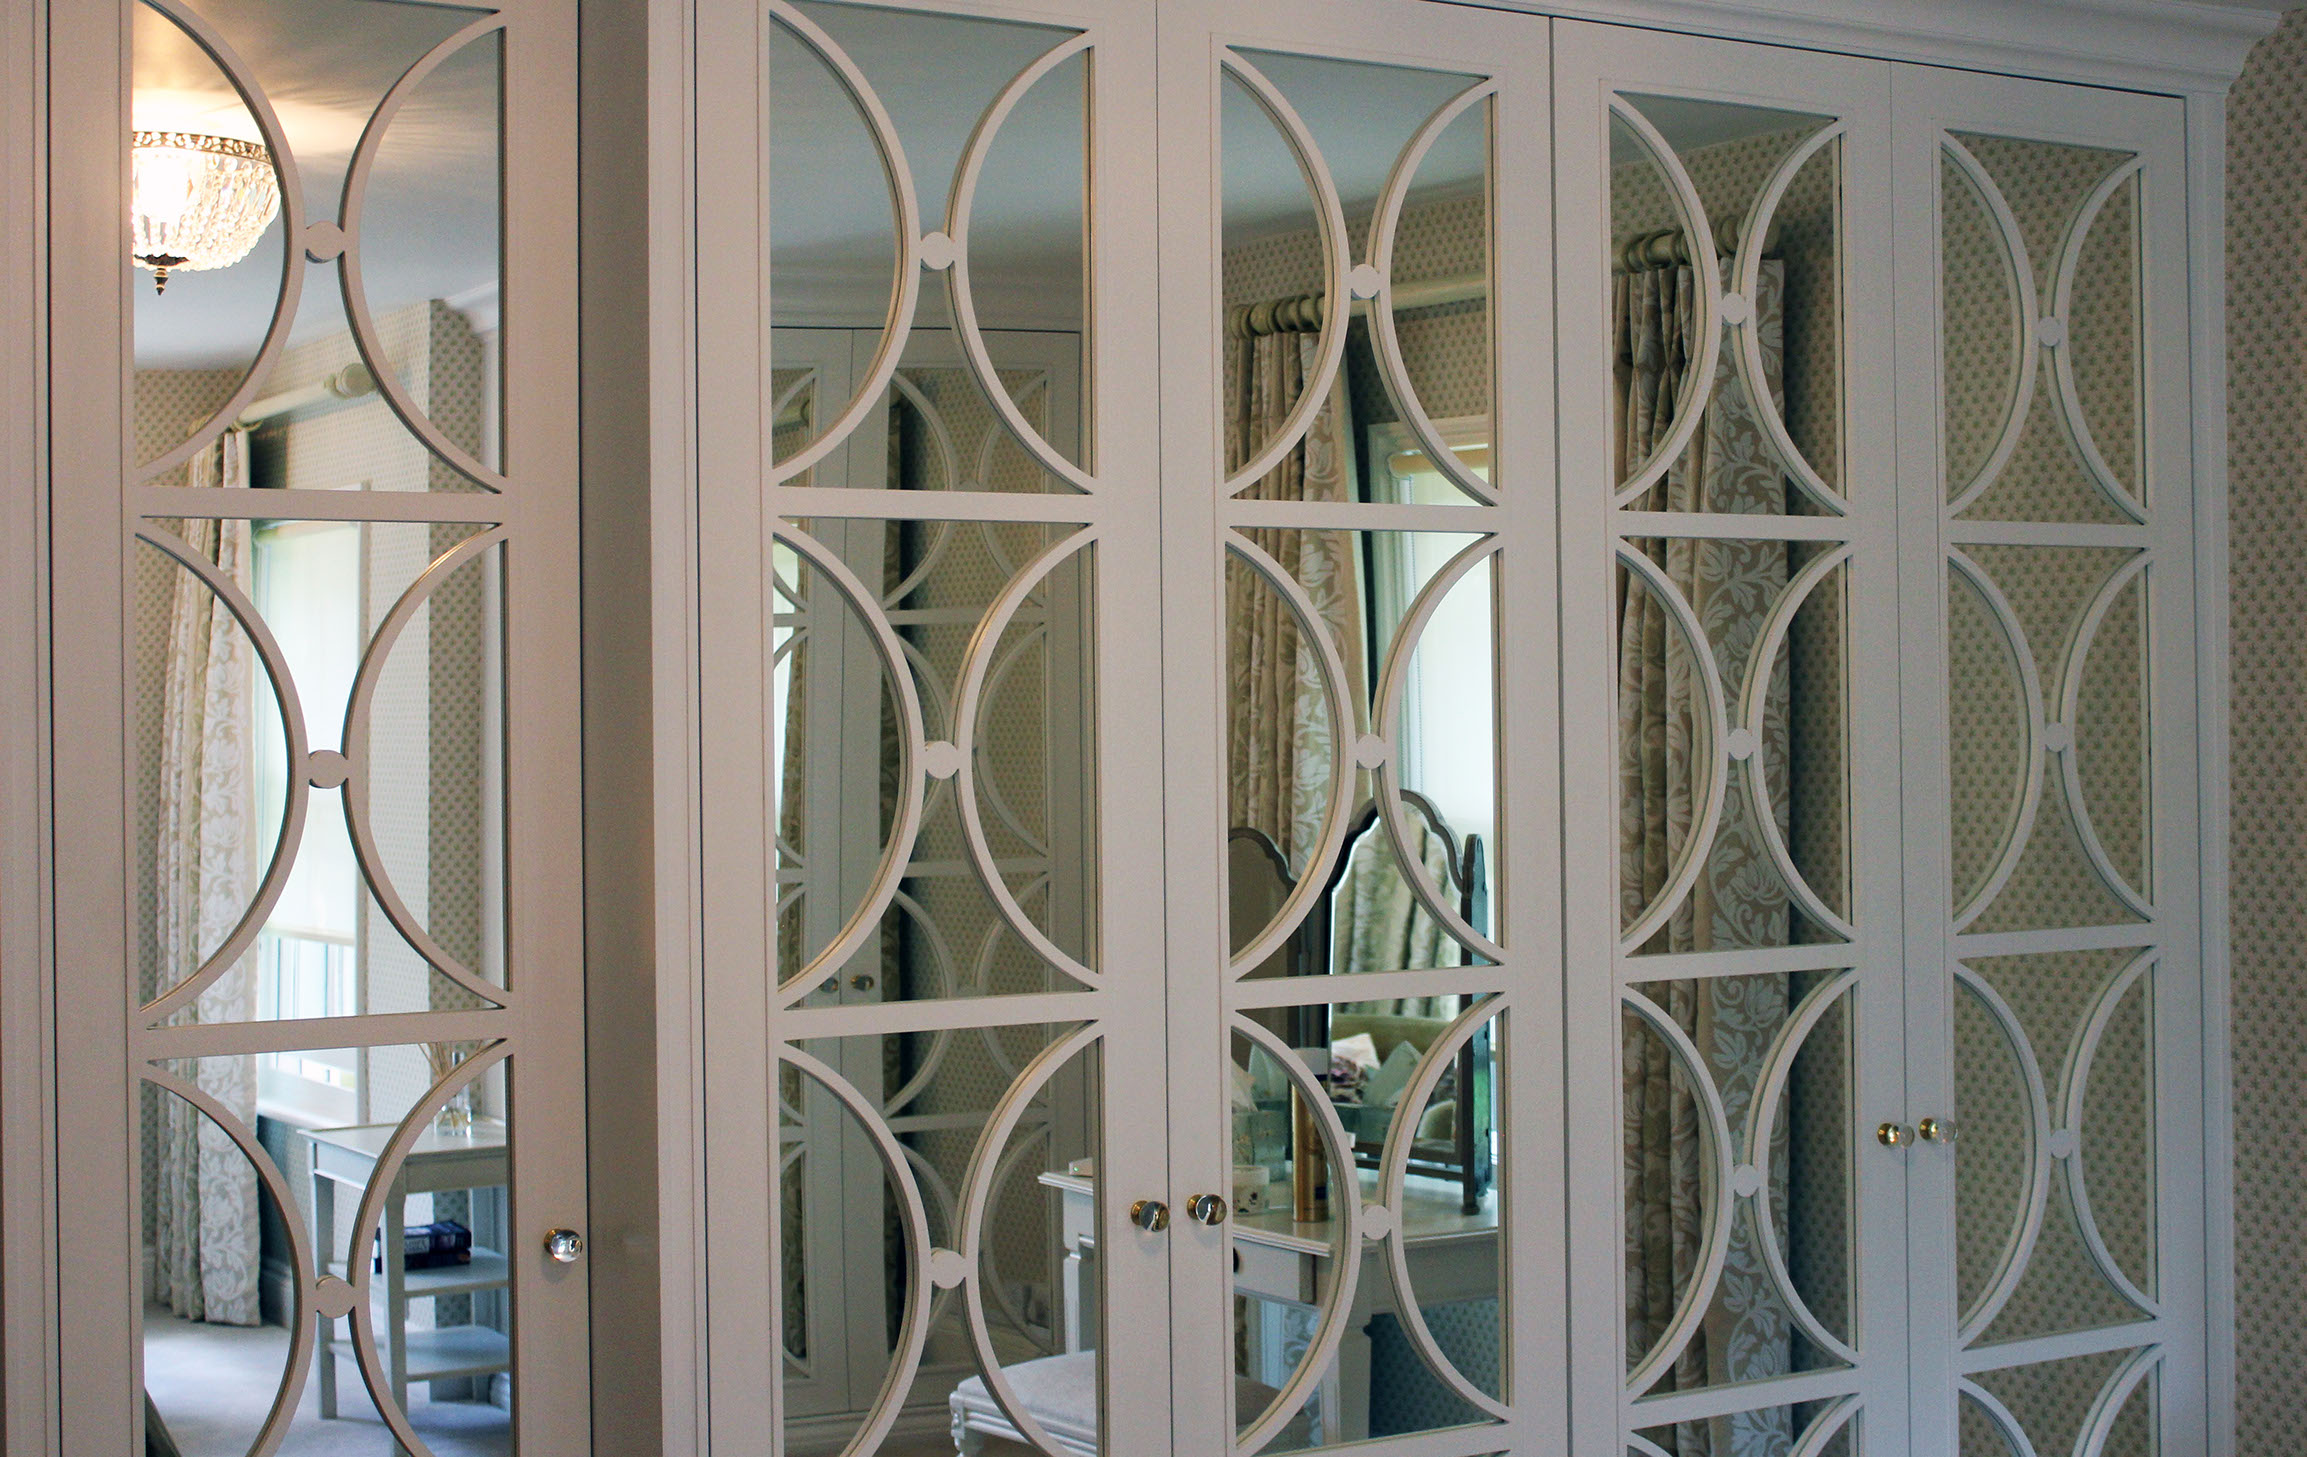 Tailor made fitted mirrored wardrobe doors